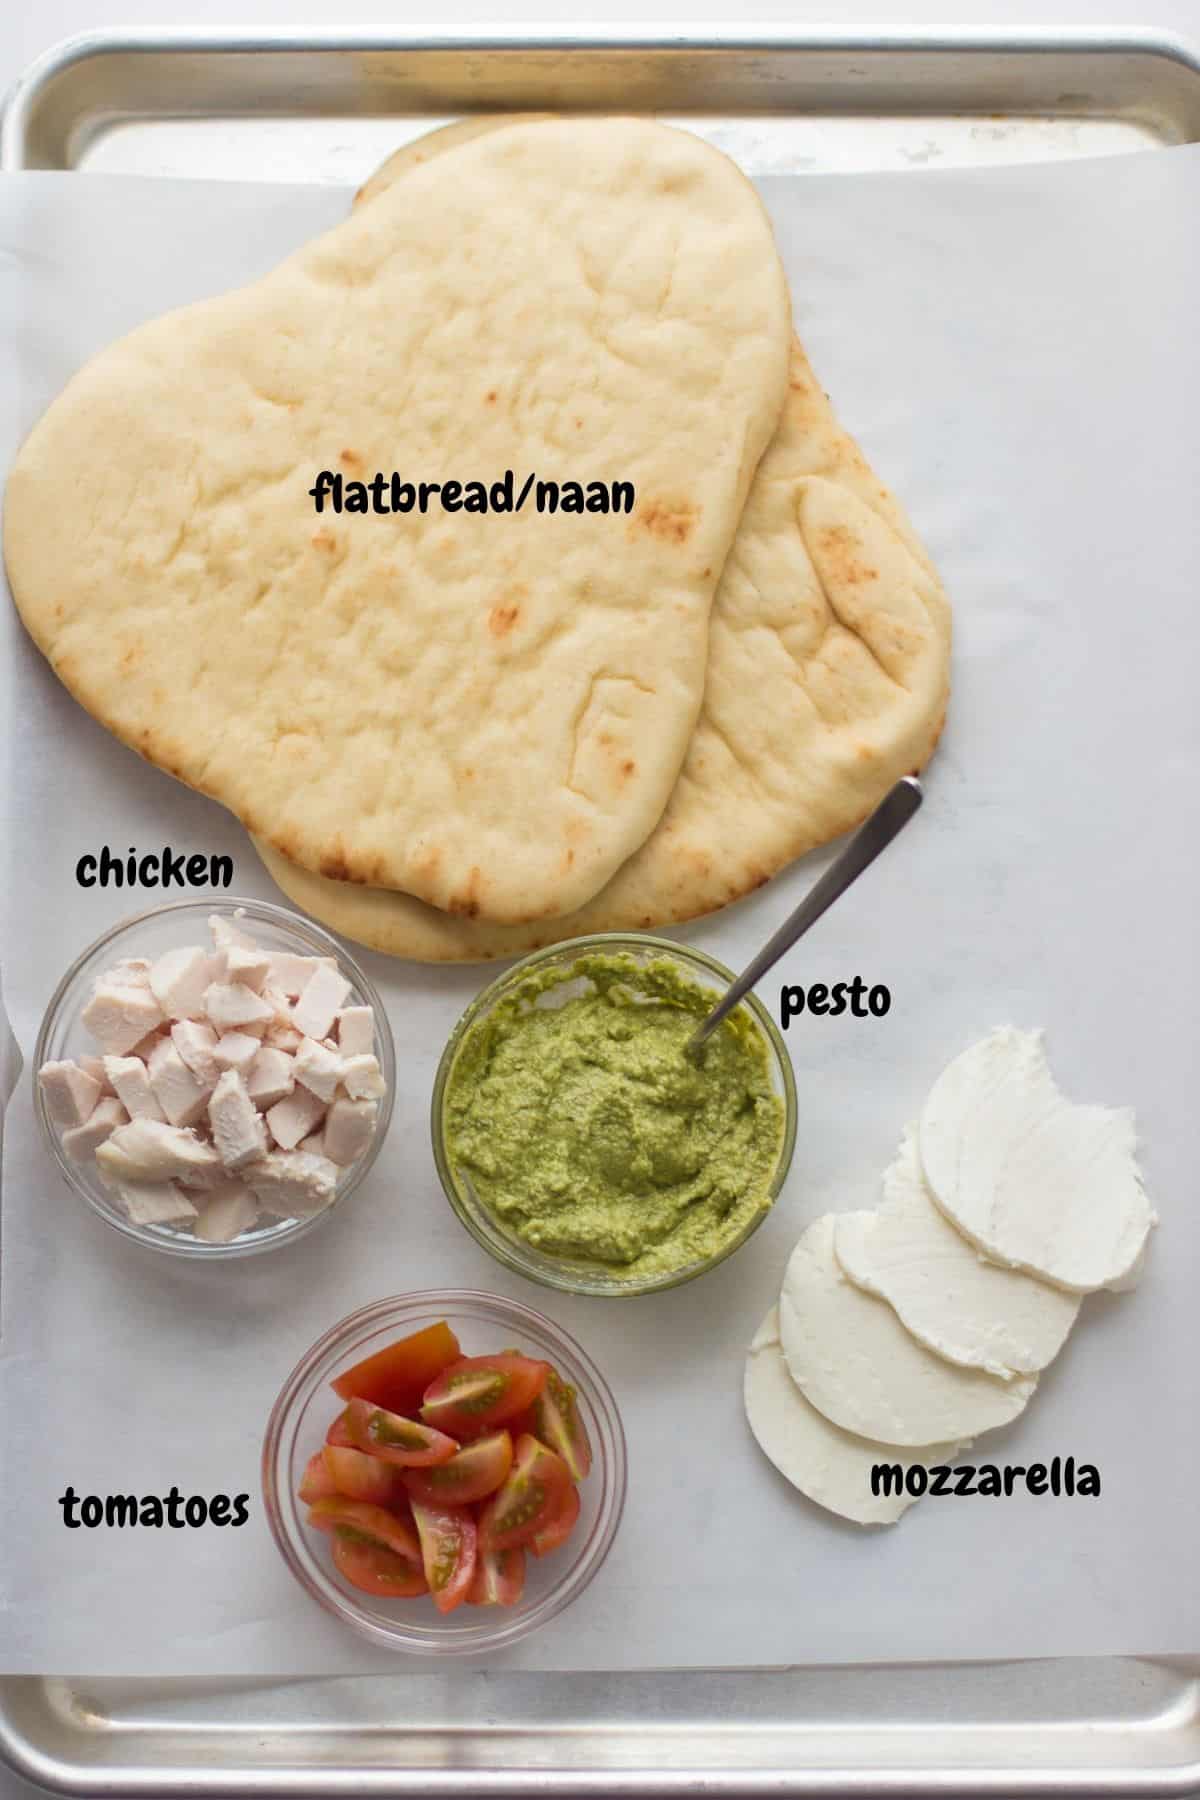 All the ingredients for flatbread pizza laid out on a white background.